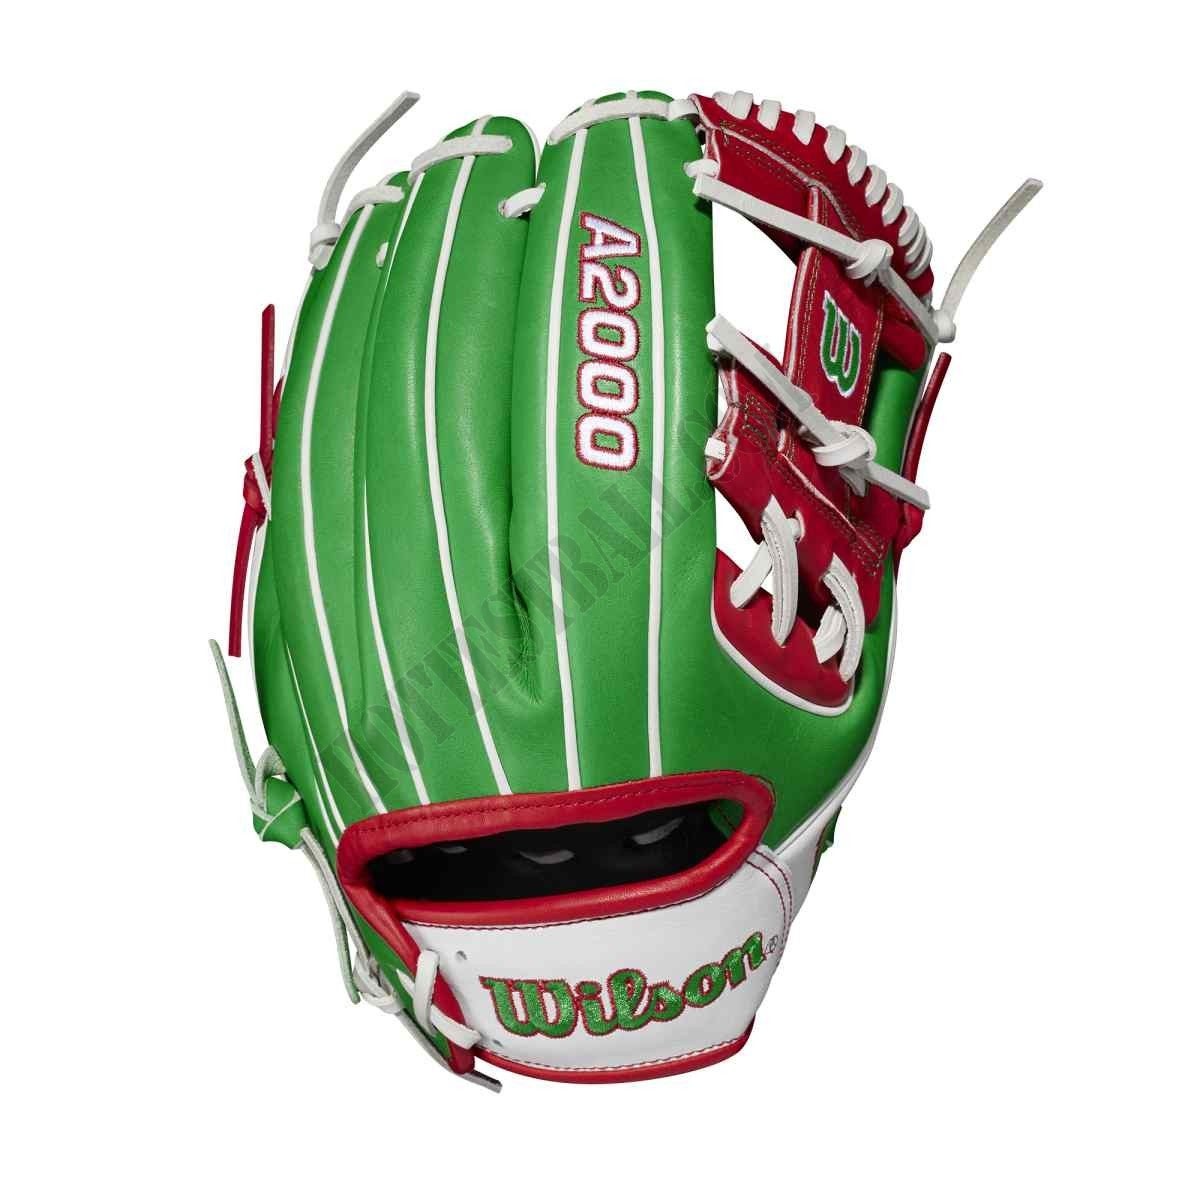 2021 A2000 1786 Mexico 11.5" Infield Baseball Glove - Limited Edition ● Wilson Promotions - -1